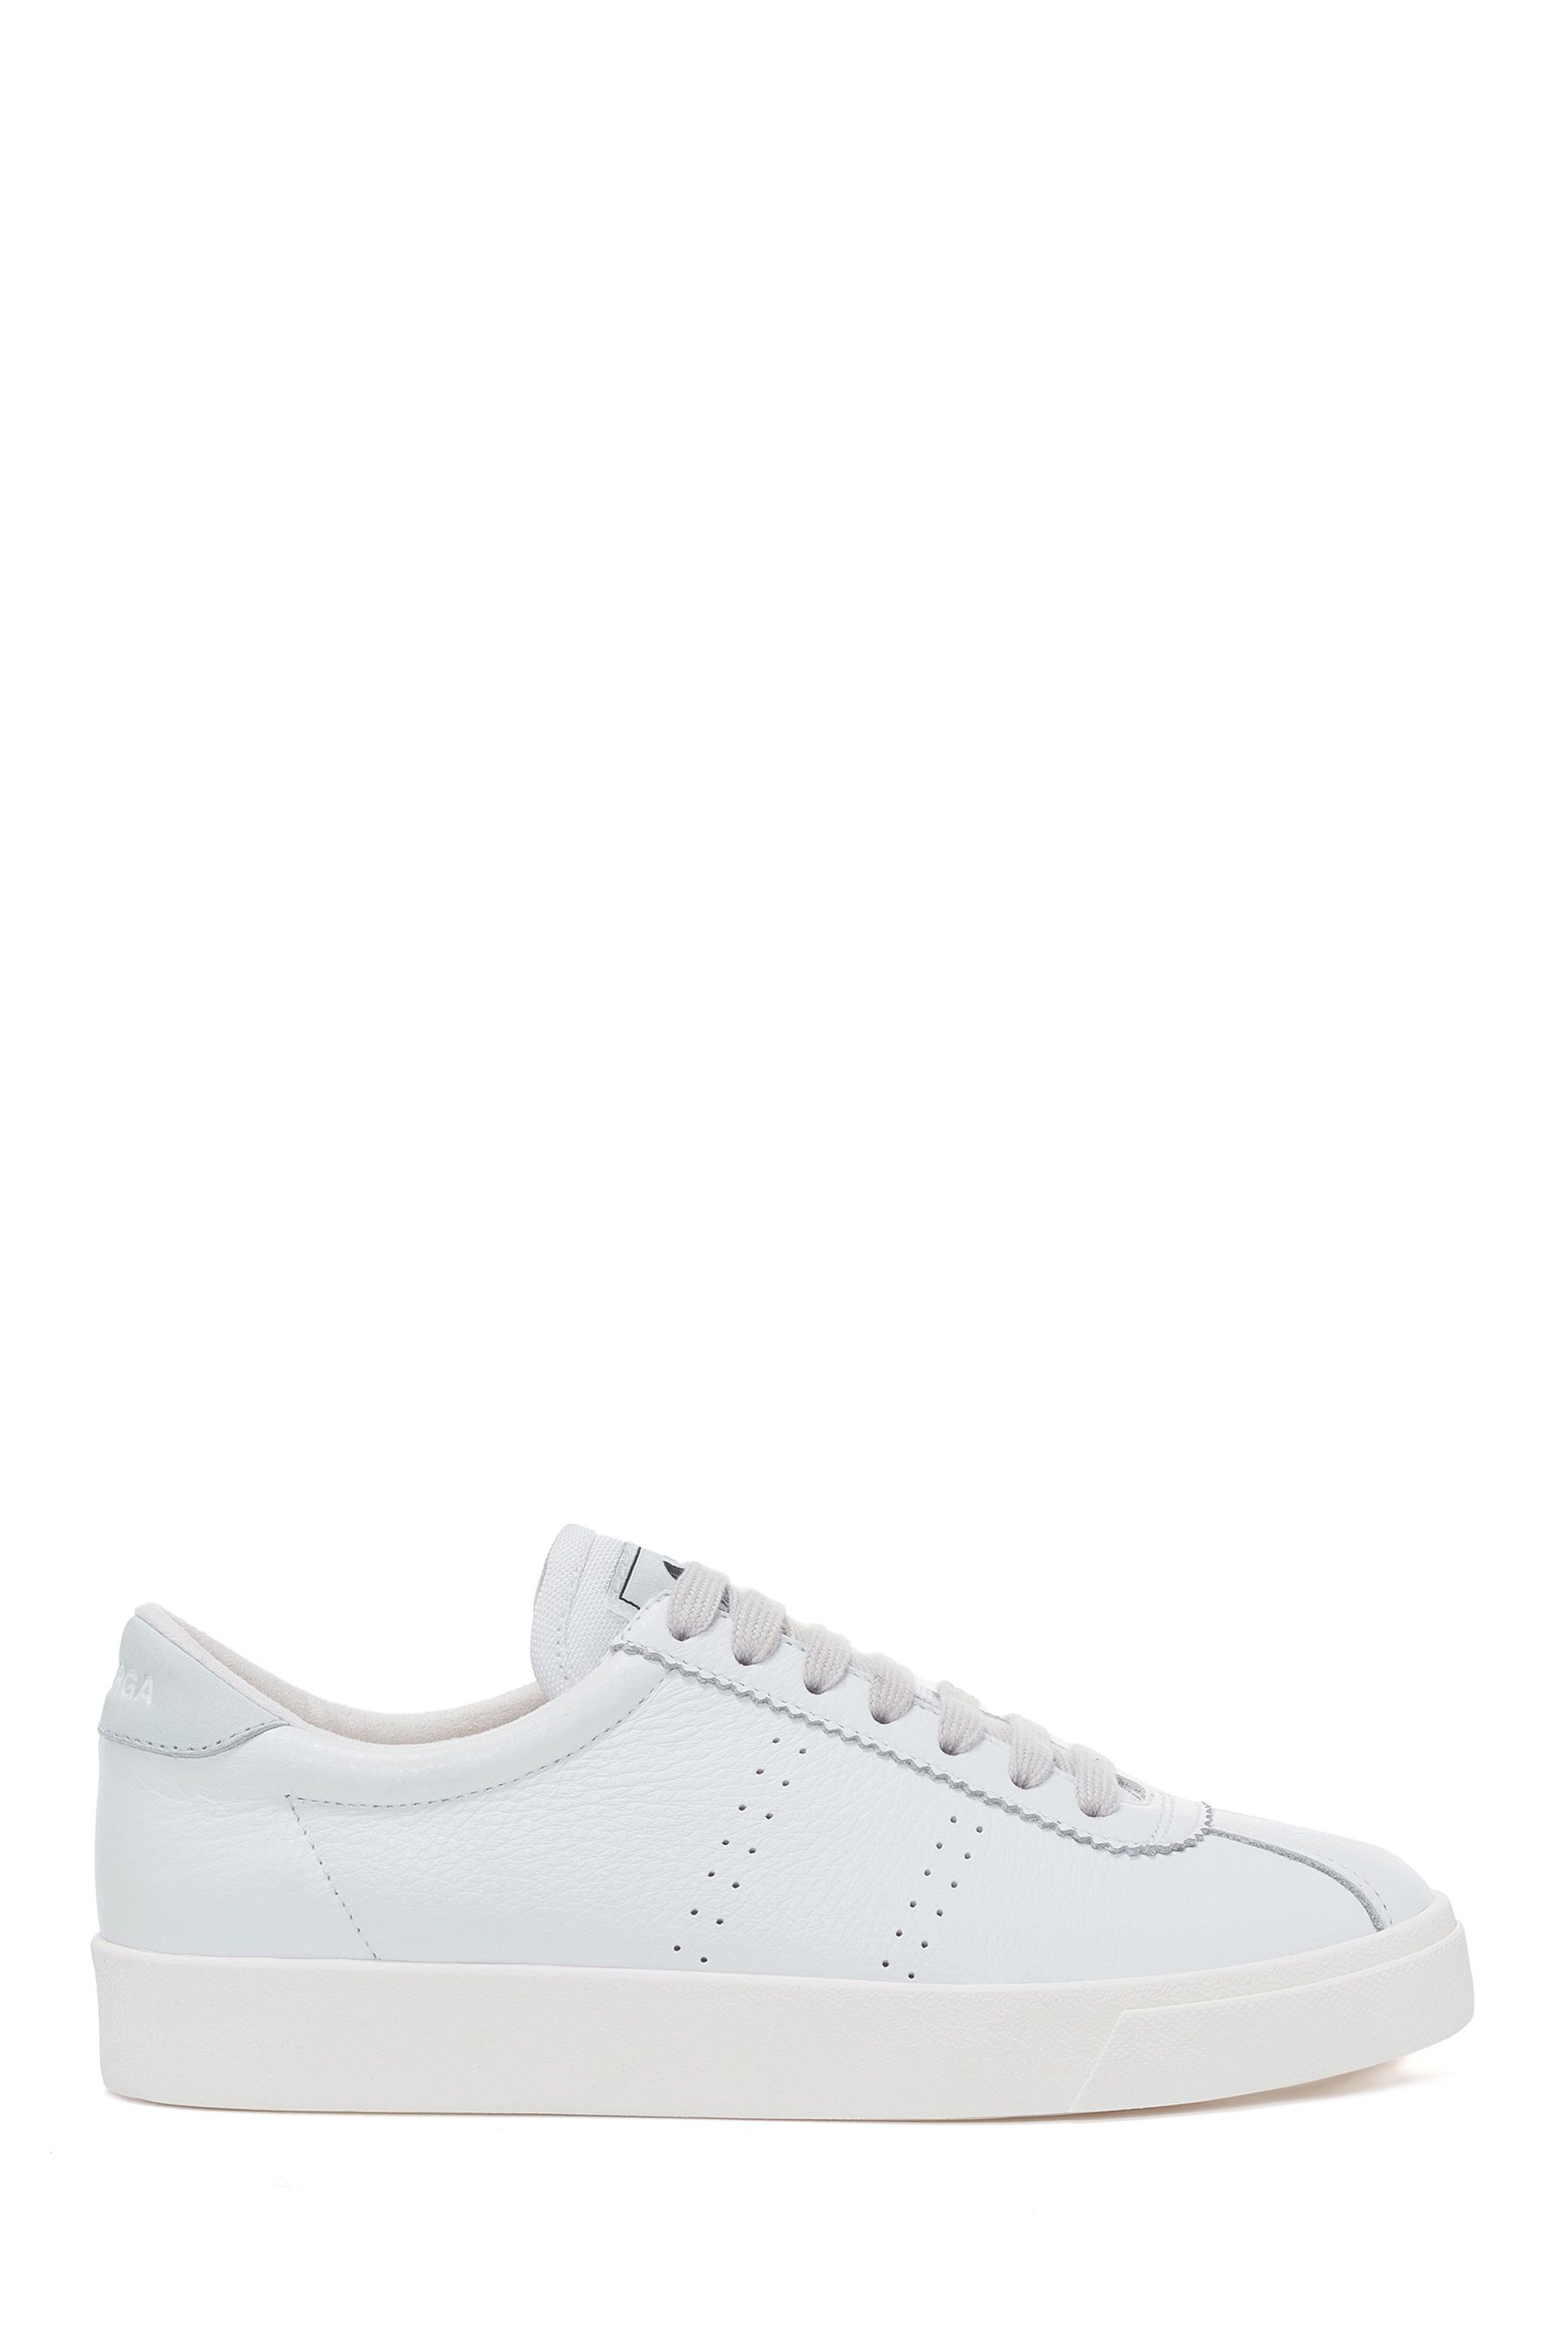 Buy Superga 2843 Club S White Comfort Leather Trainers from Next Ireland